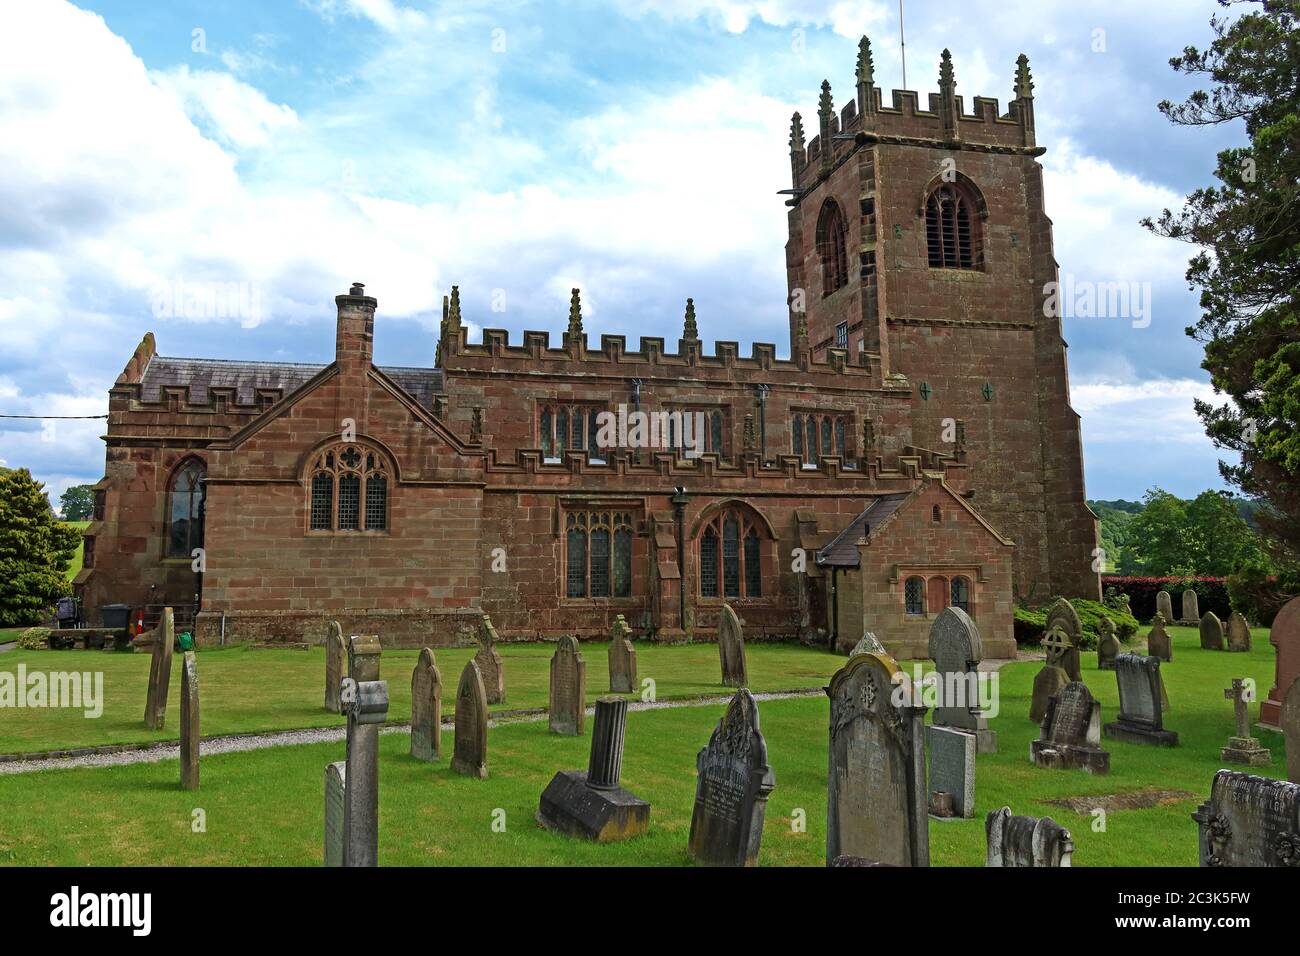 St Michael and All Angels Church, 23 Wirsfall Rd, Marbury, Whitchurch, Cheshire, England, UK, SY13 4LL Stockfoto